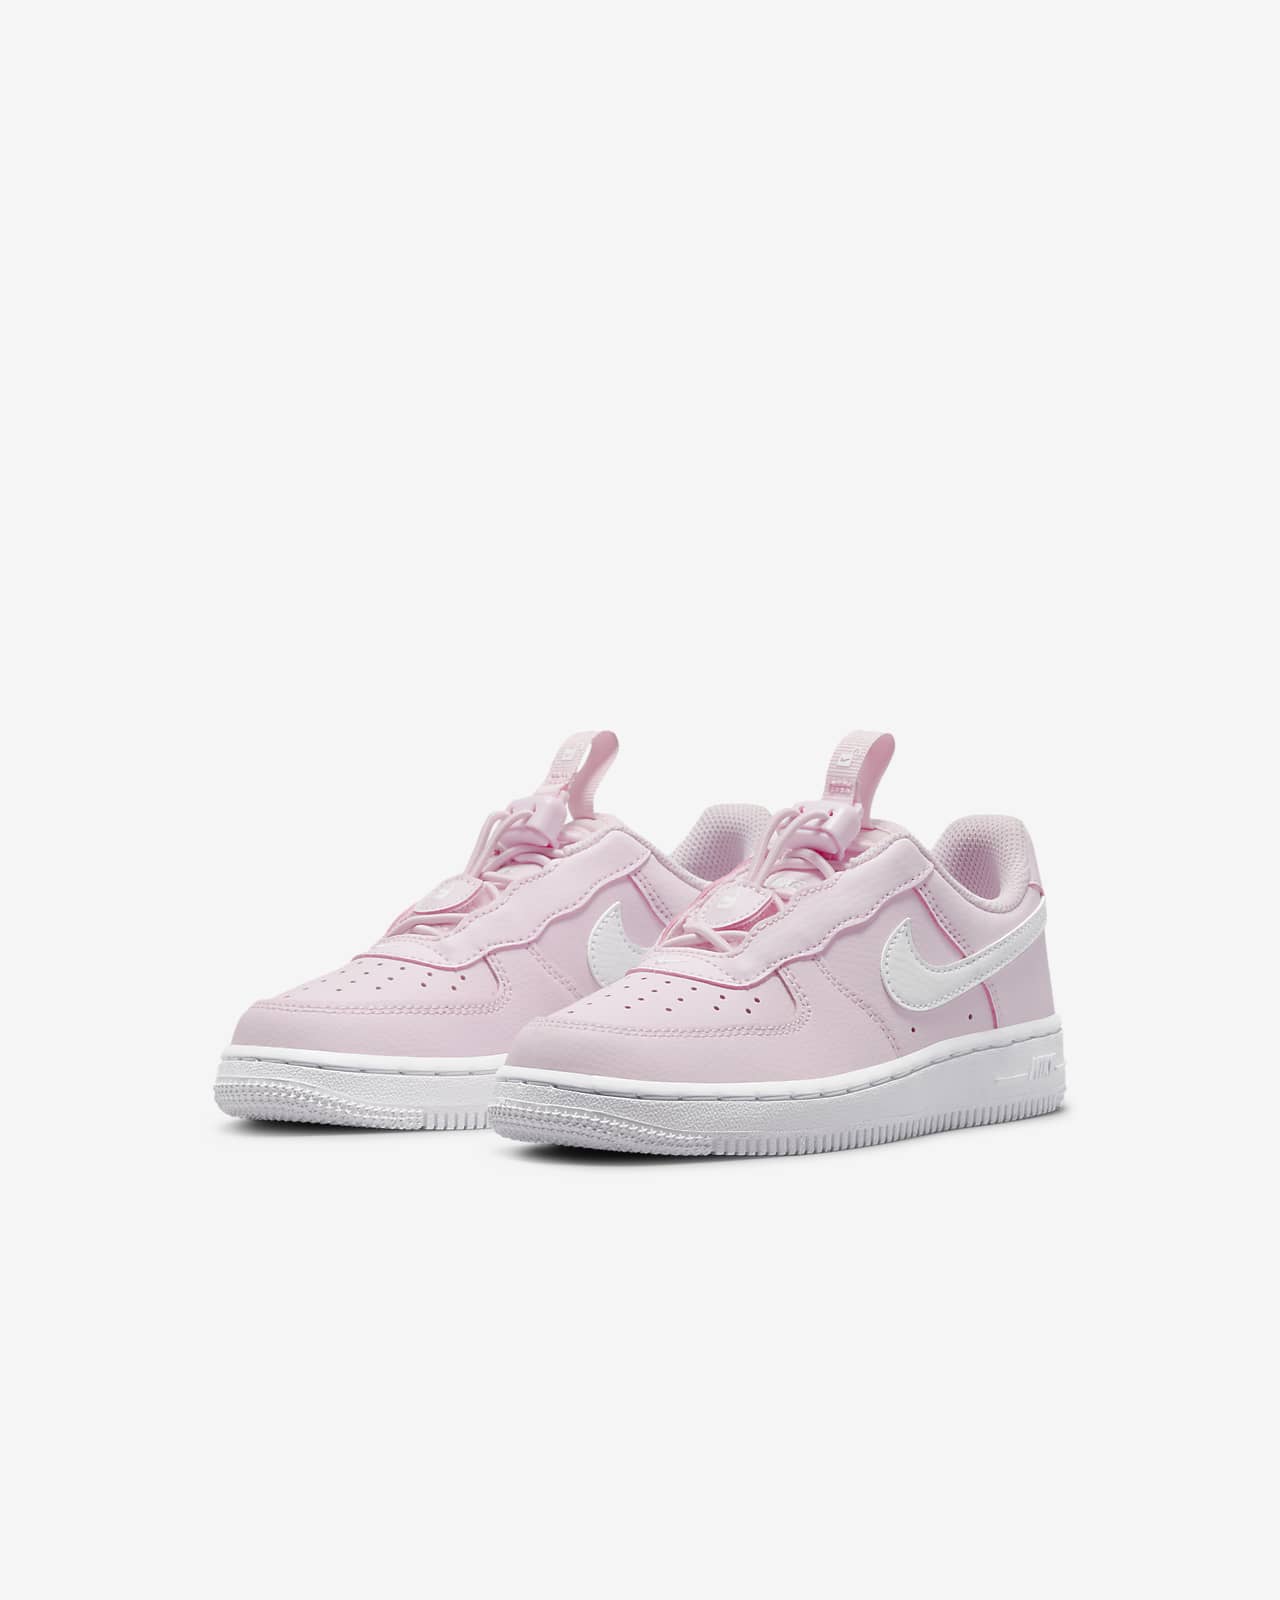 little girl nike shoes on sale